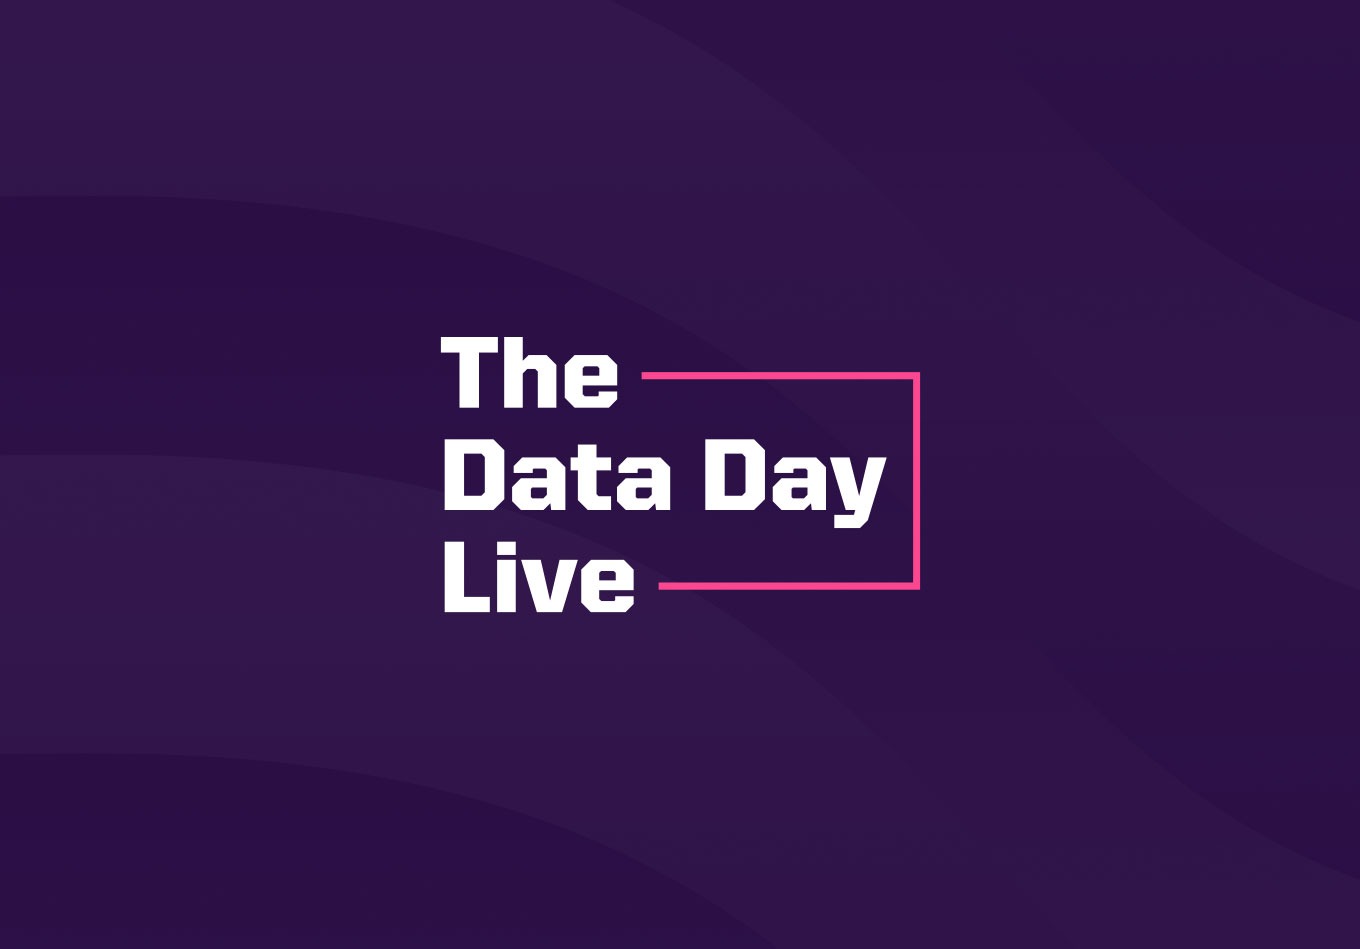 England, USA March on but What’s to Come From France? | World Cup Preview | The Data Day Live